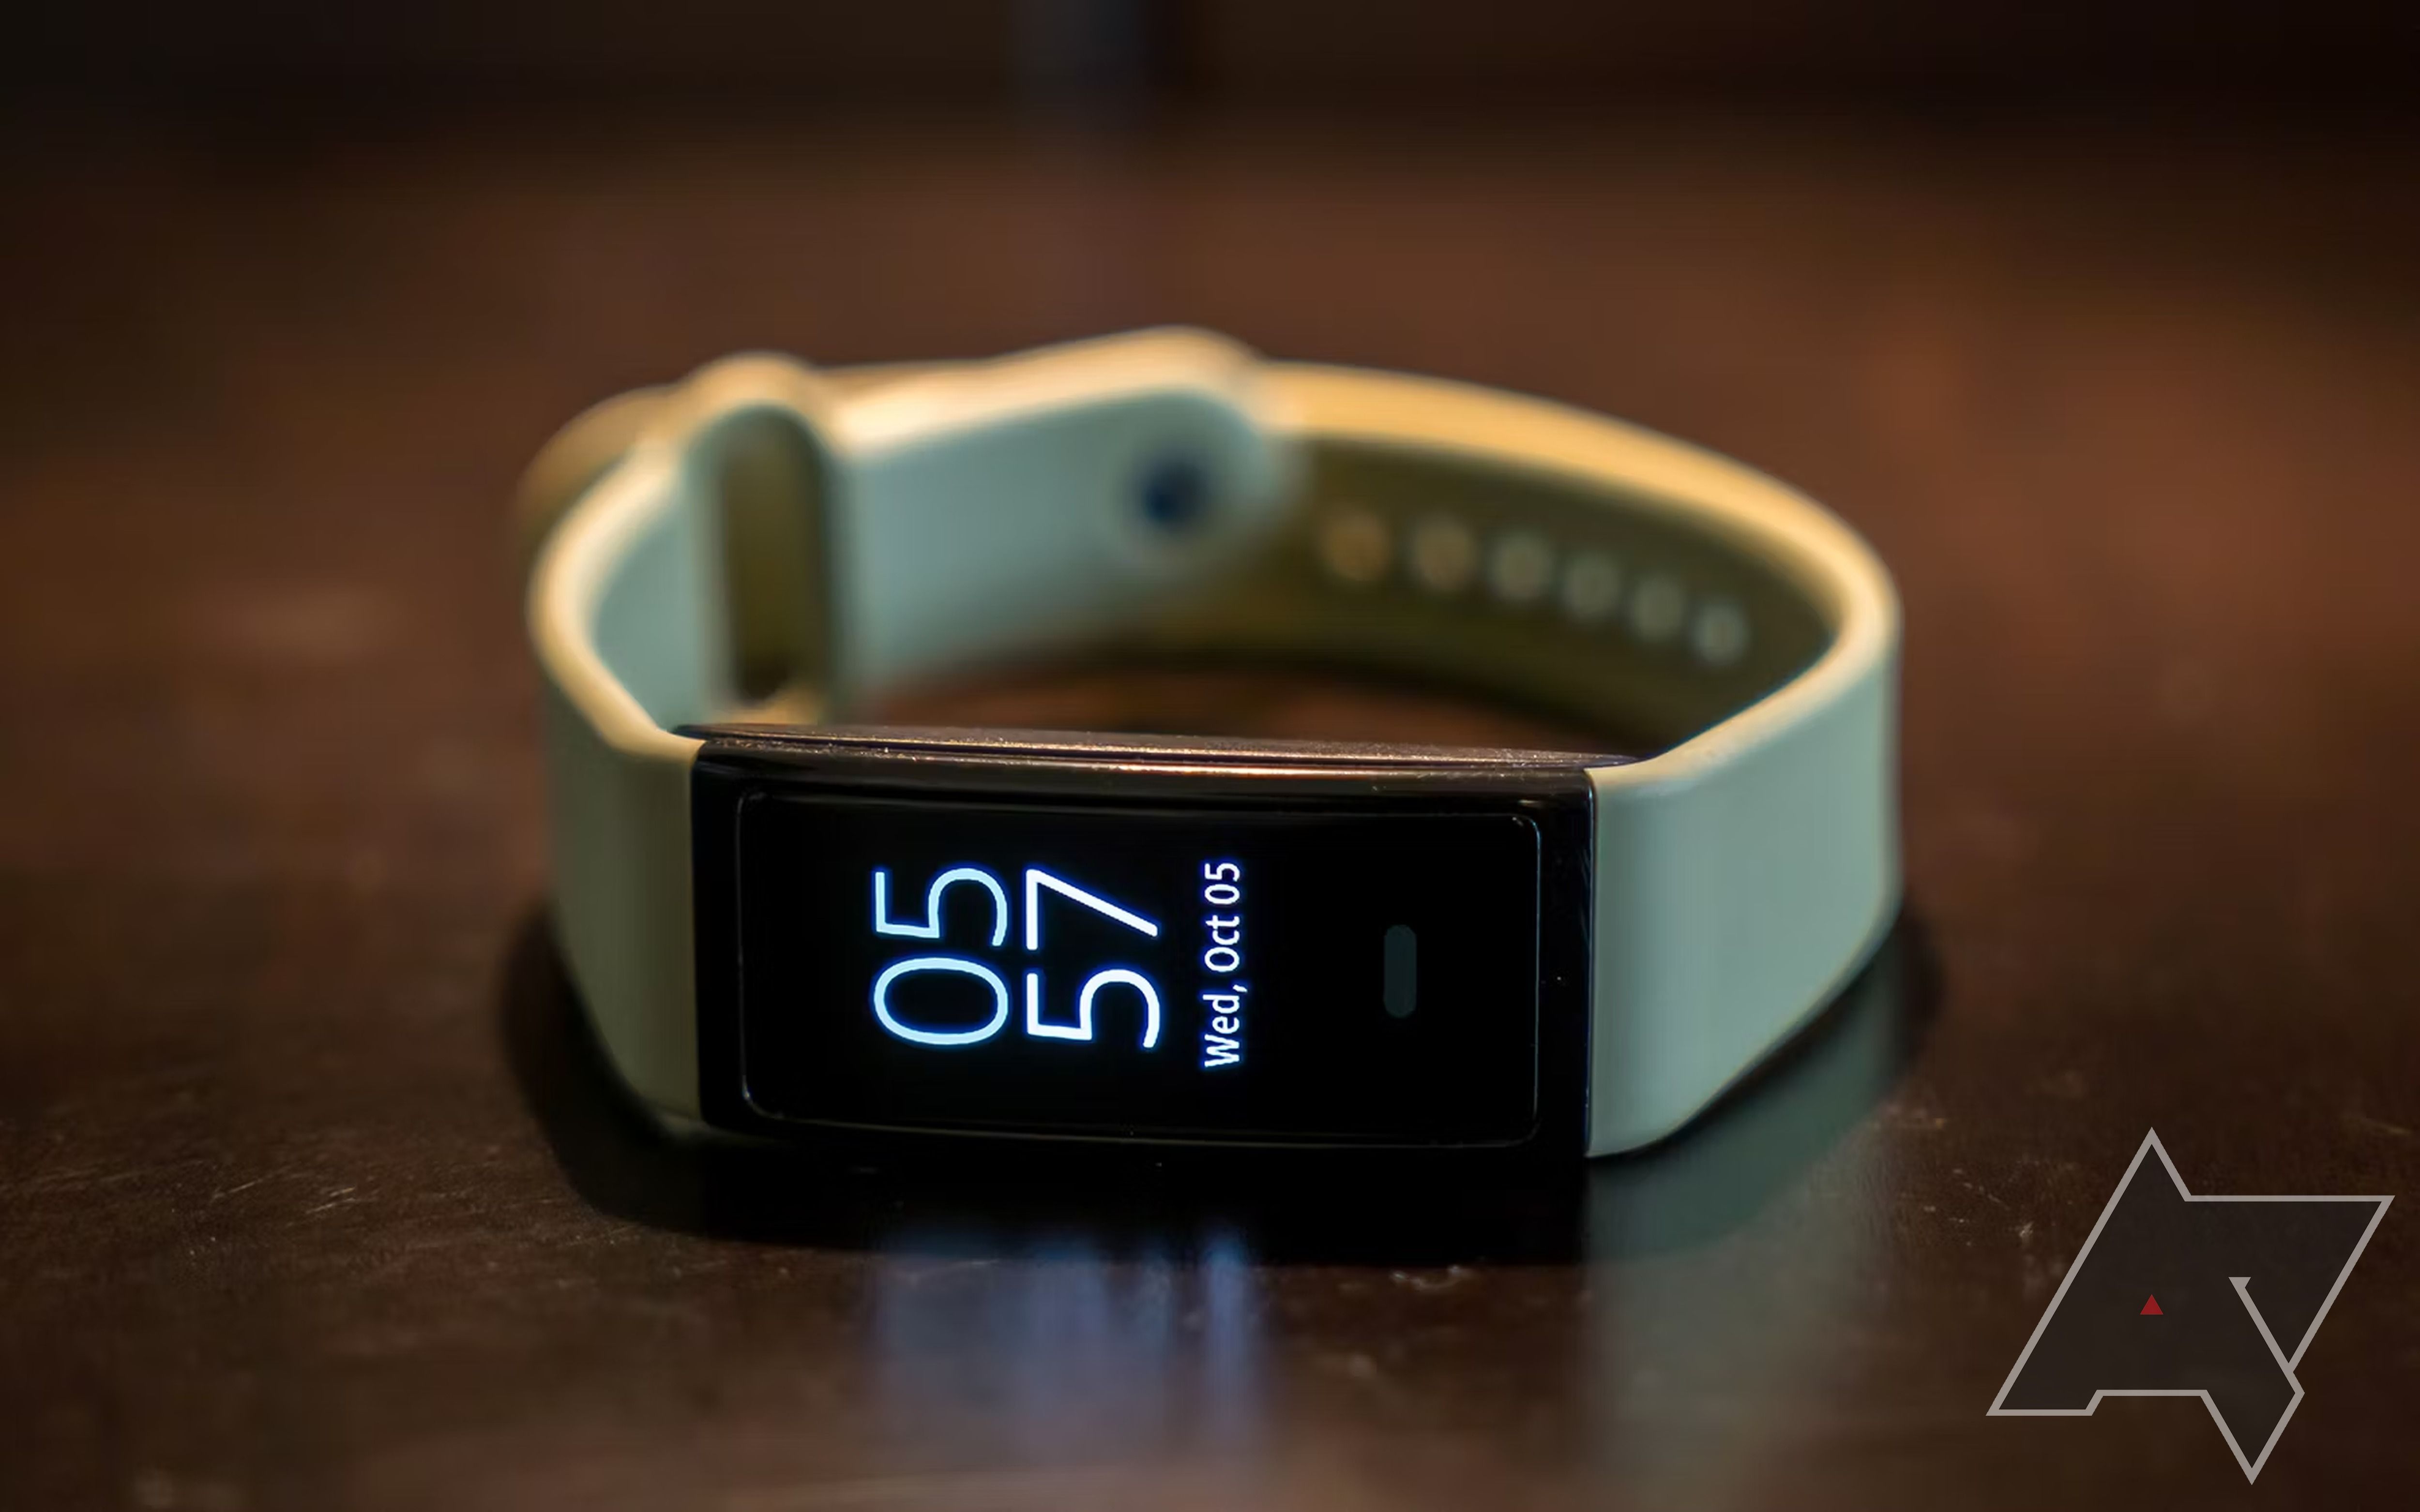 Halo View review: A lightweight fitness tracker tied to a deeper app